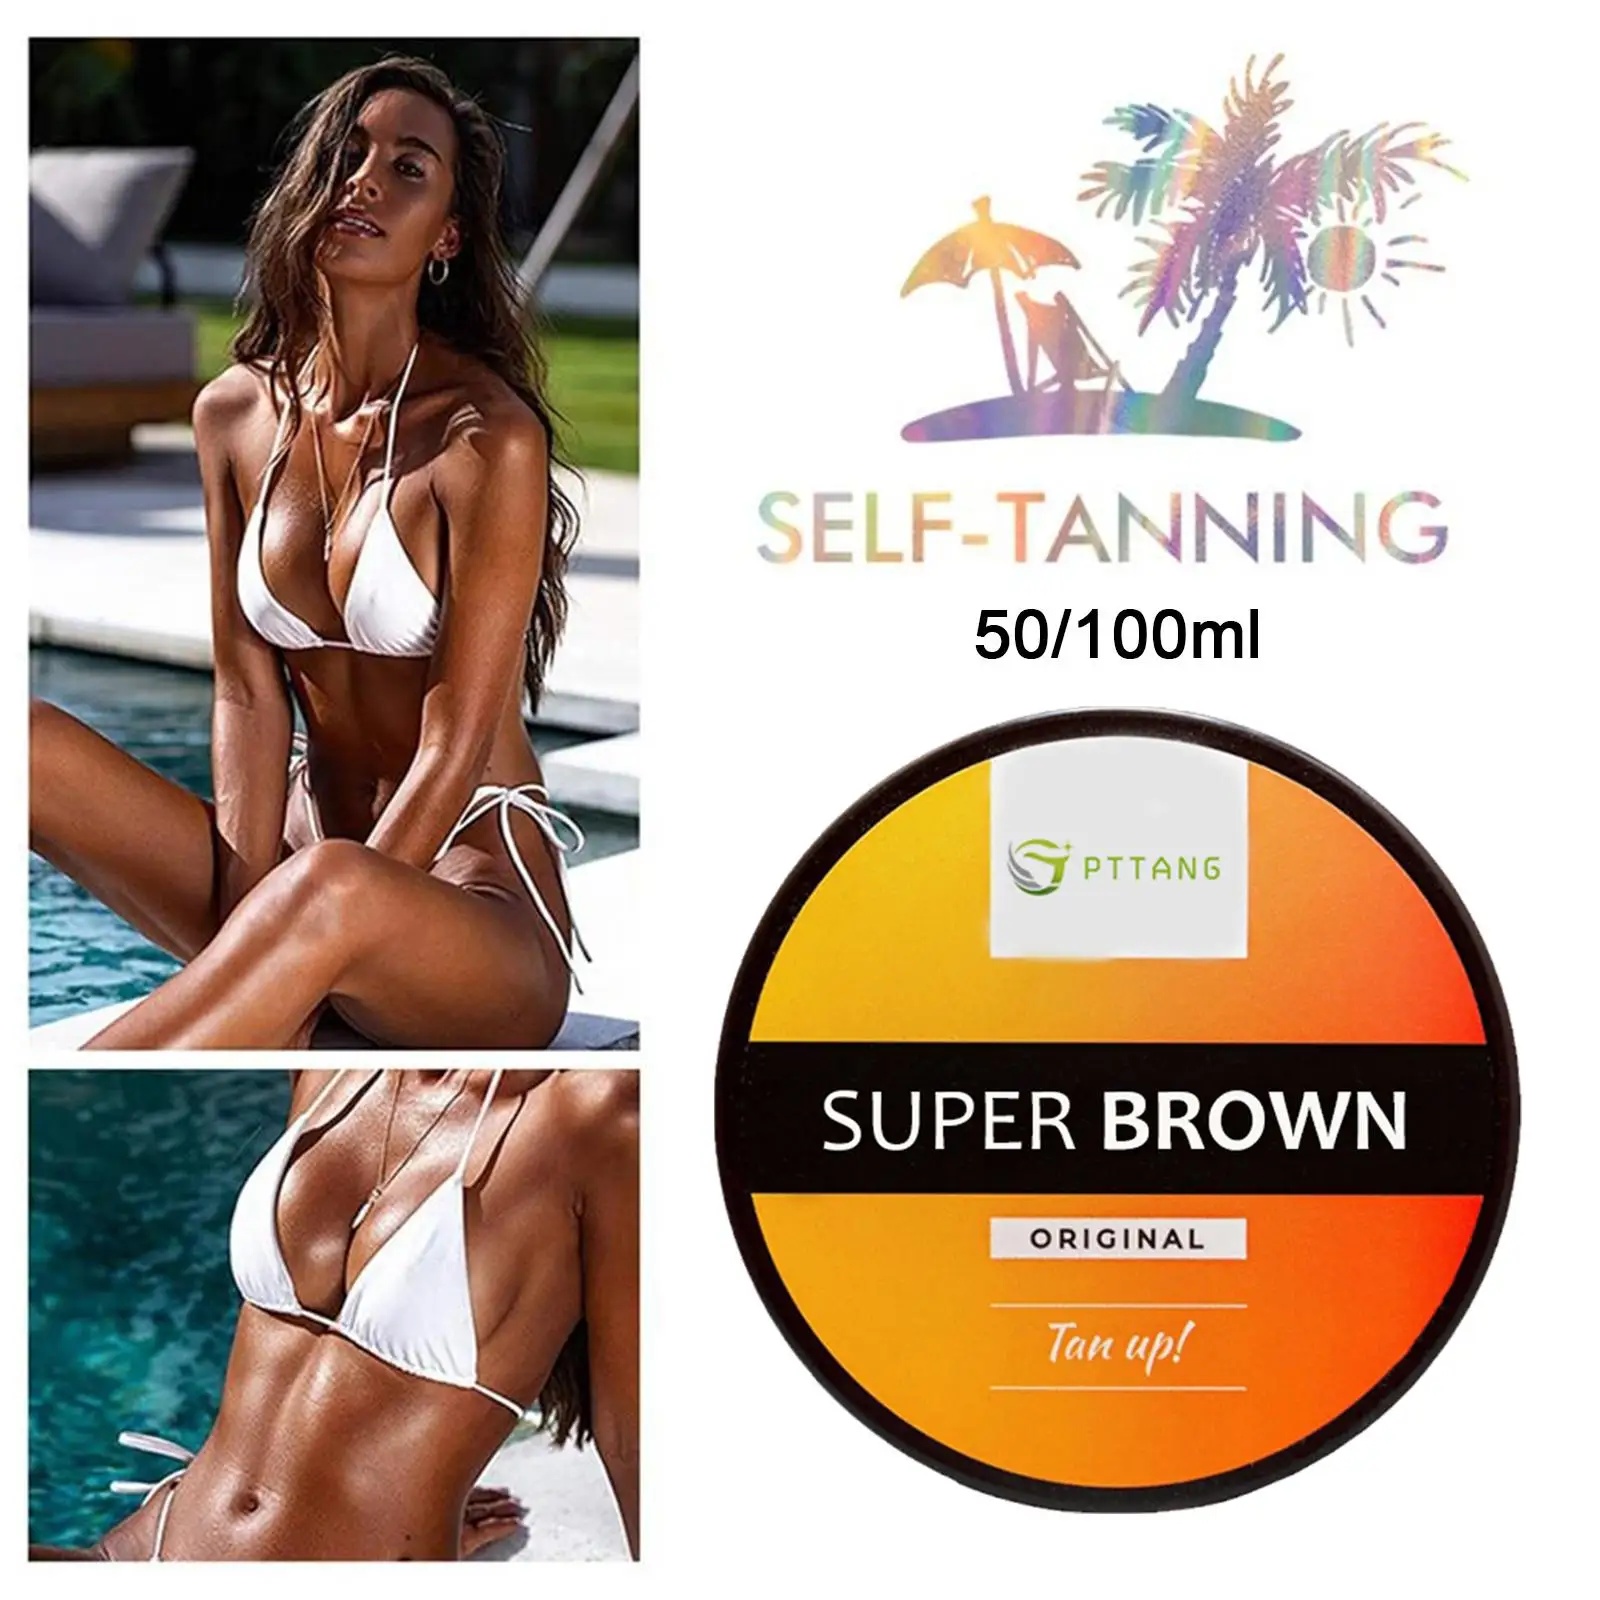 

50/100ml Self Tanning Cream Self Sun Tanning Tanner For Face Body Organic Lotion Skin Coloring Sunless Tanning Bronzer